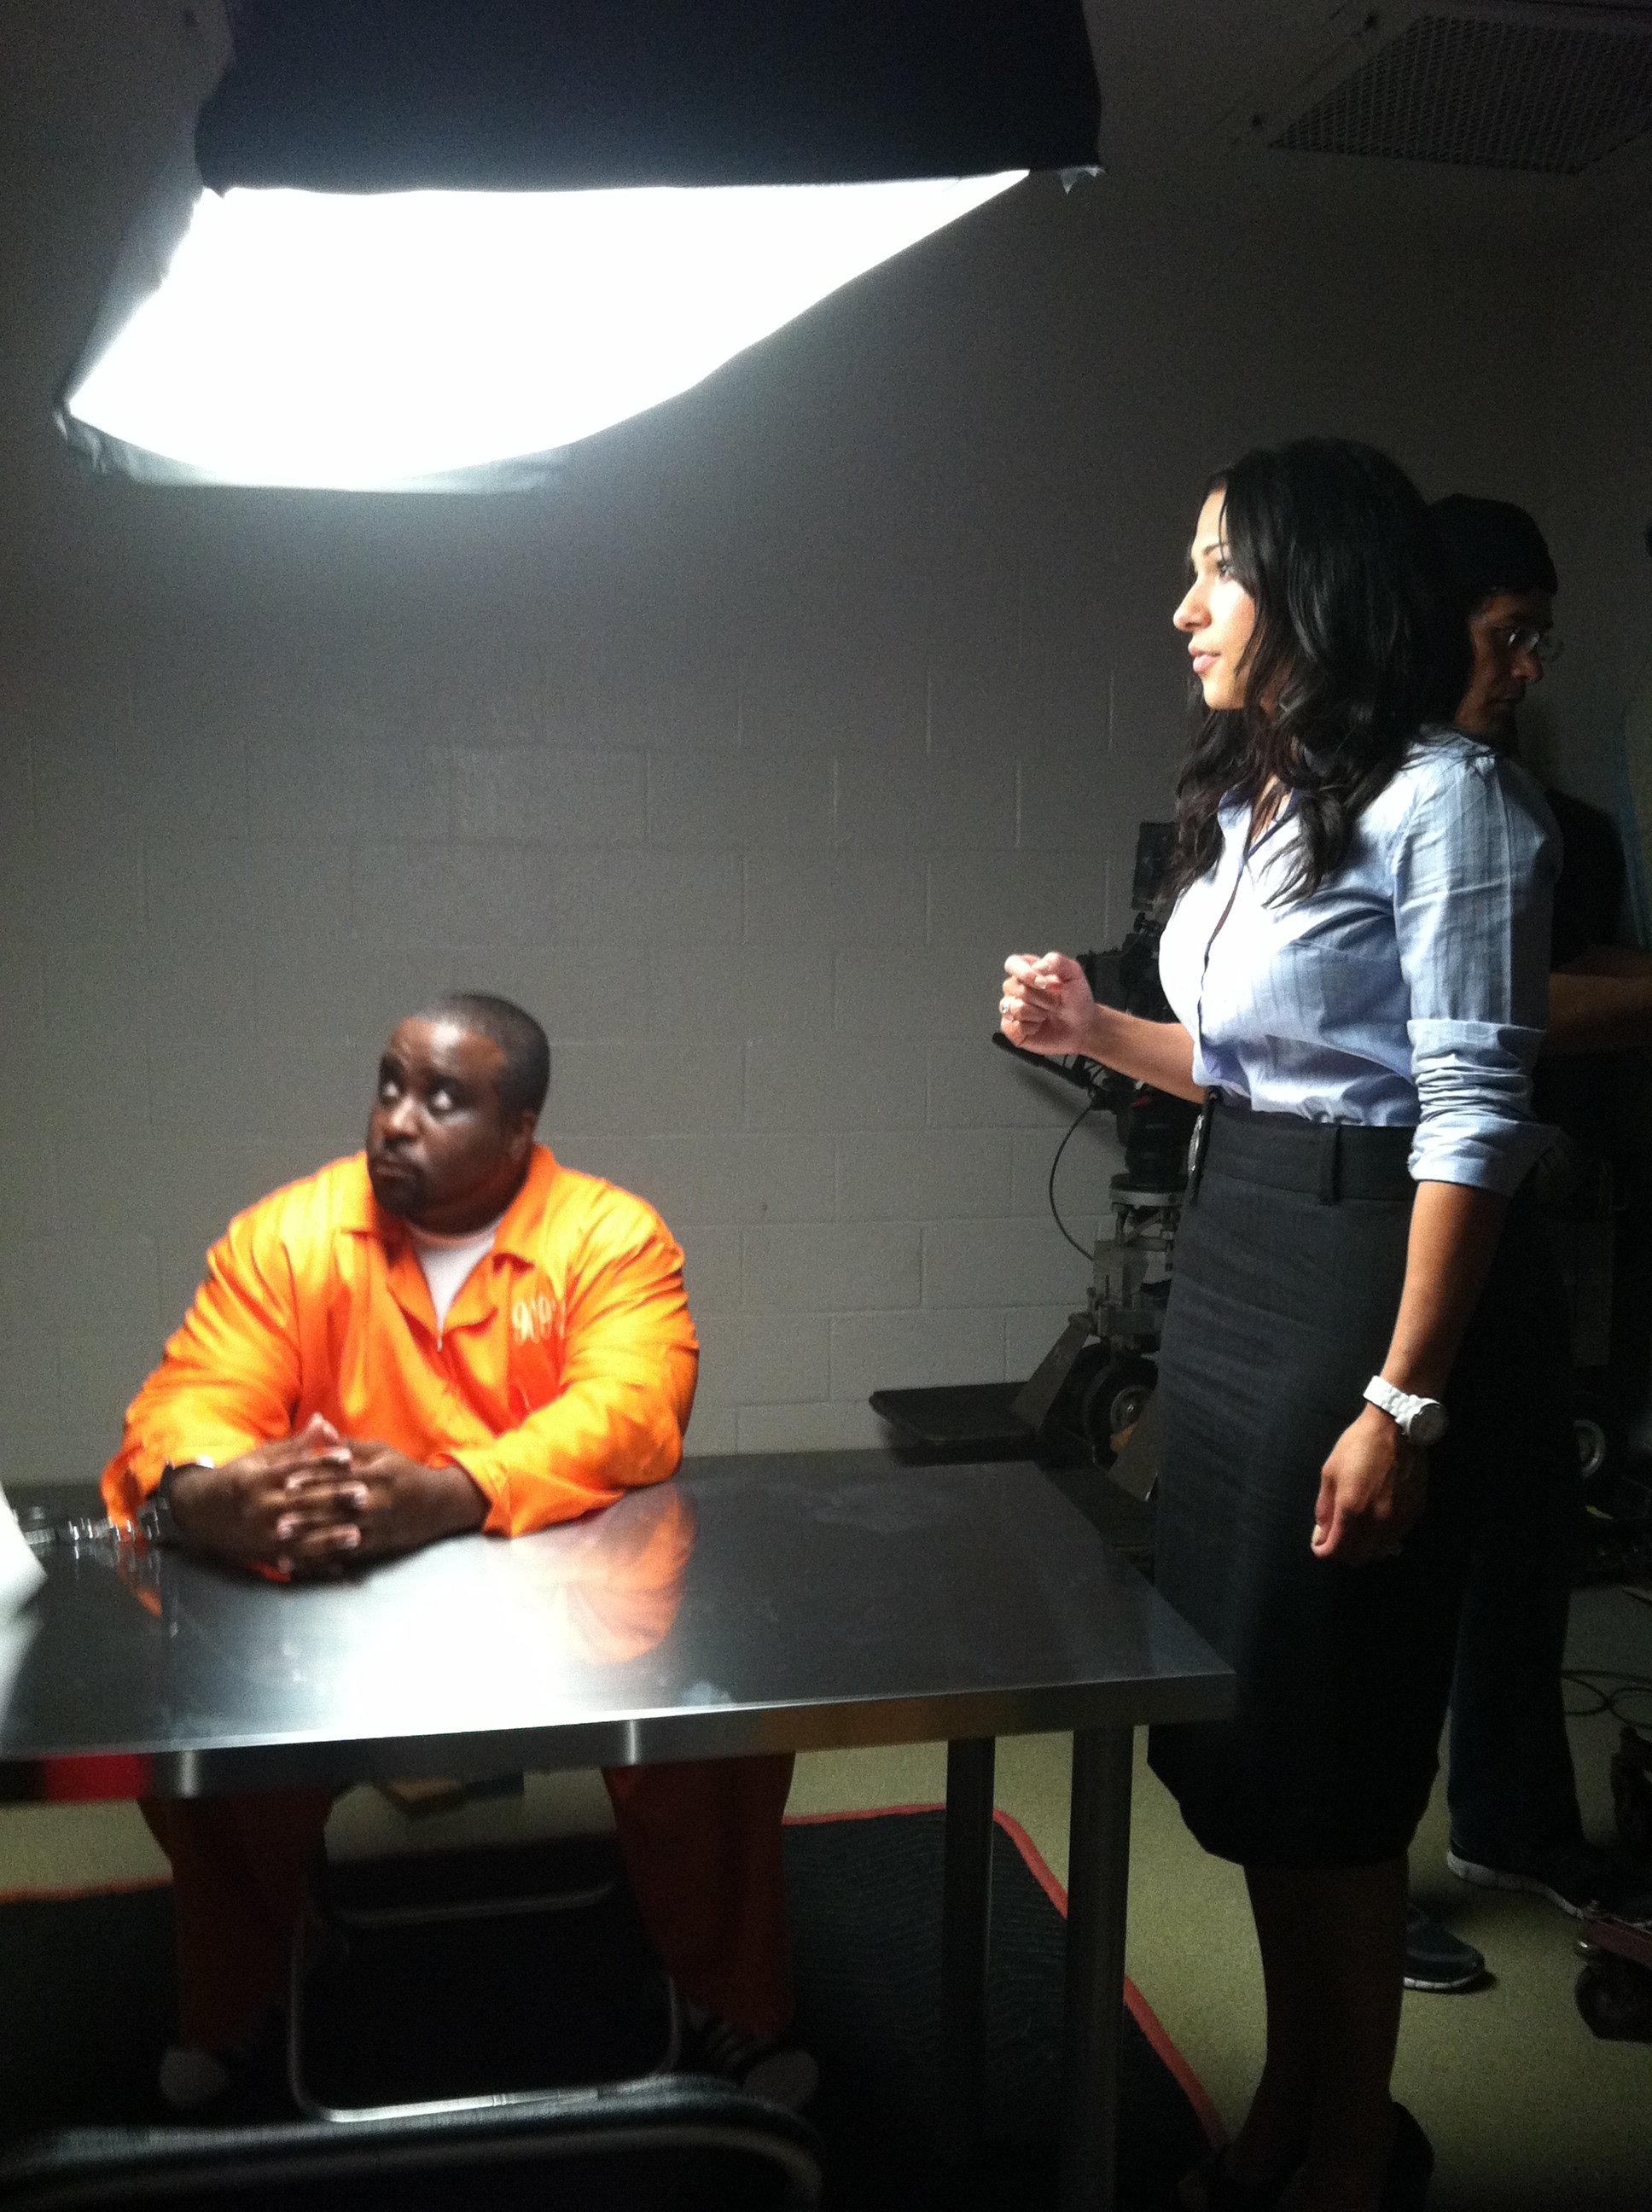 On set of America's Most Wanted playing the role of Detective Michelle Romagnoli